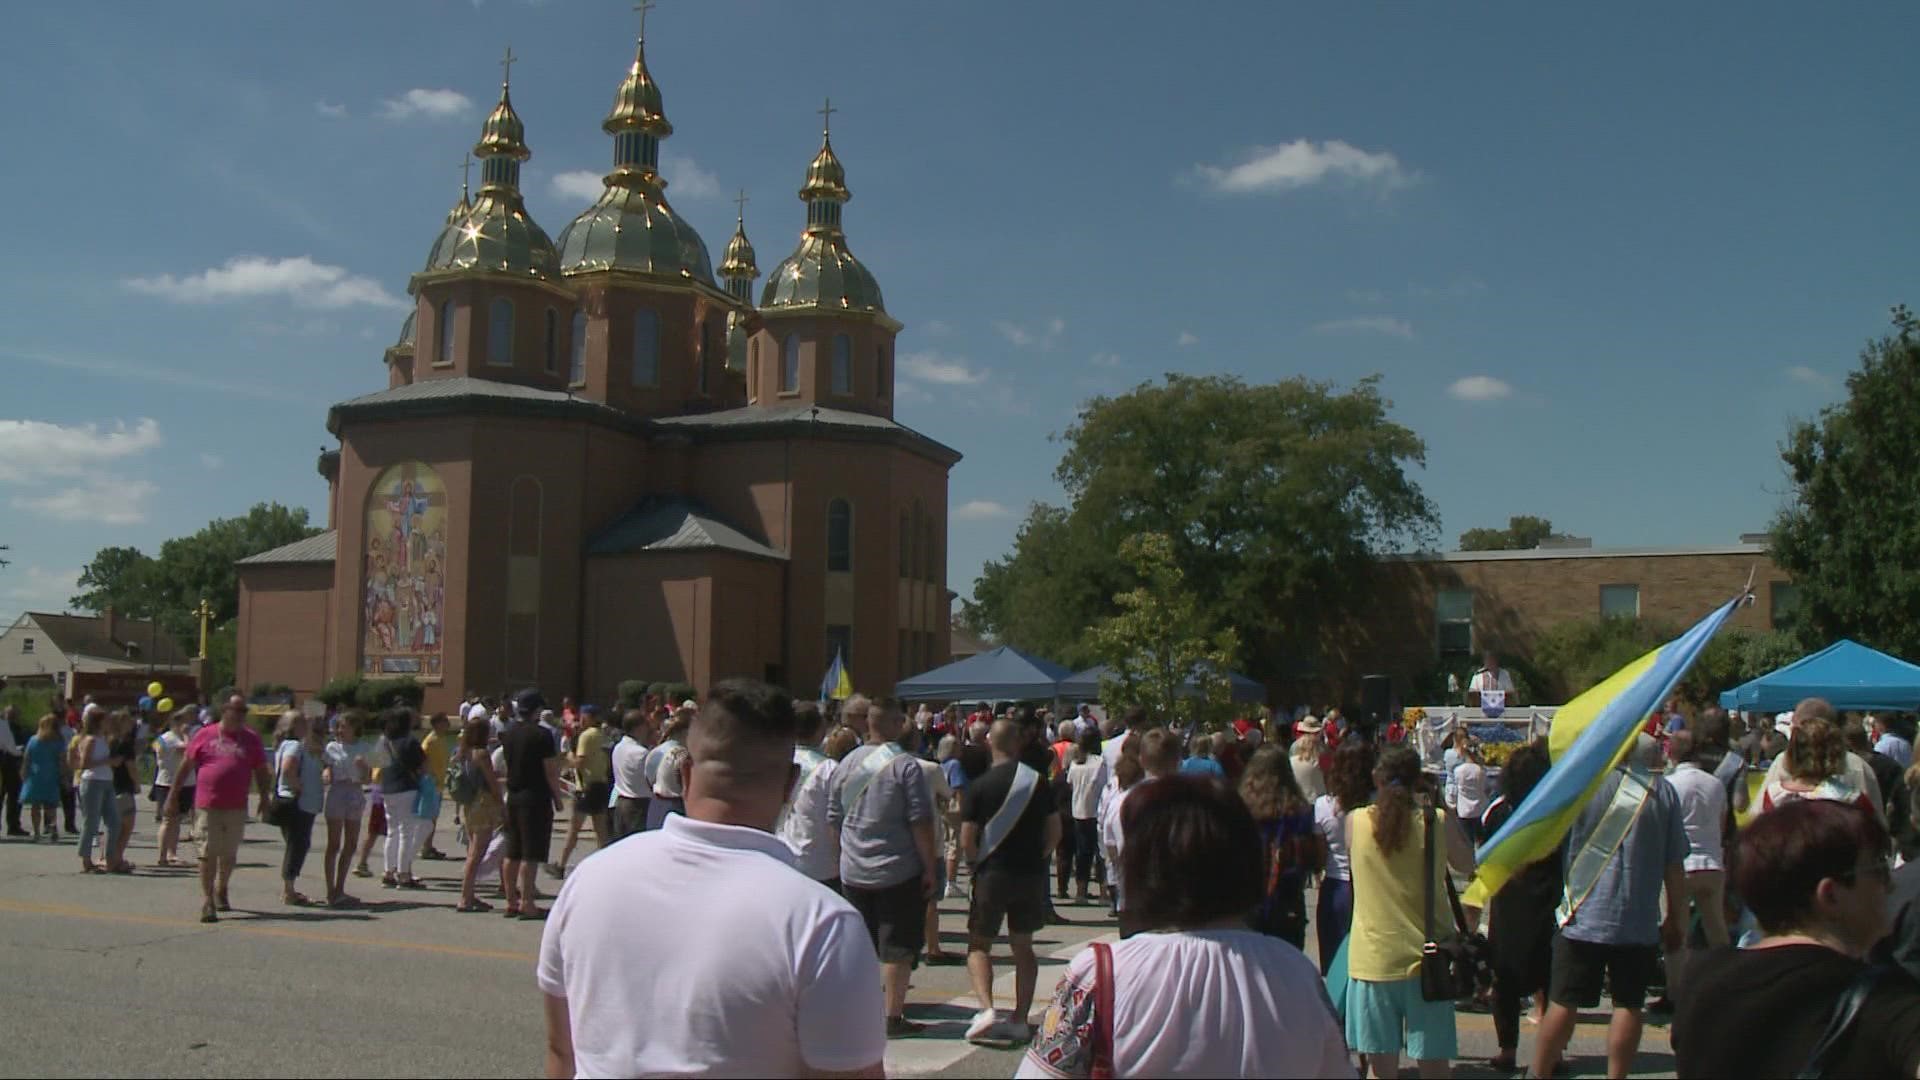 While it's been six months since the Russian invasion of Ukraine, hundreds turned out to celebrate the 31st year of the nation's independence.